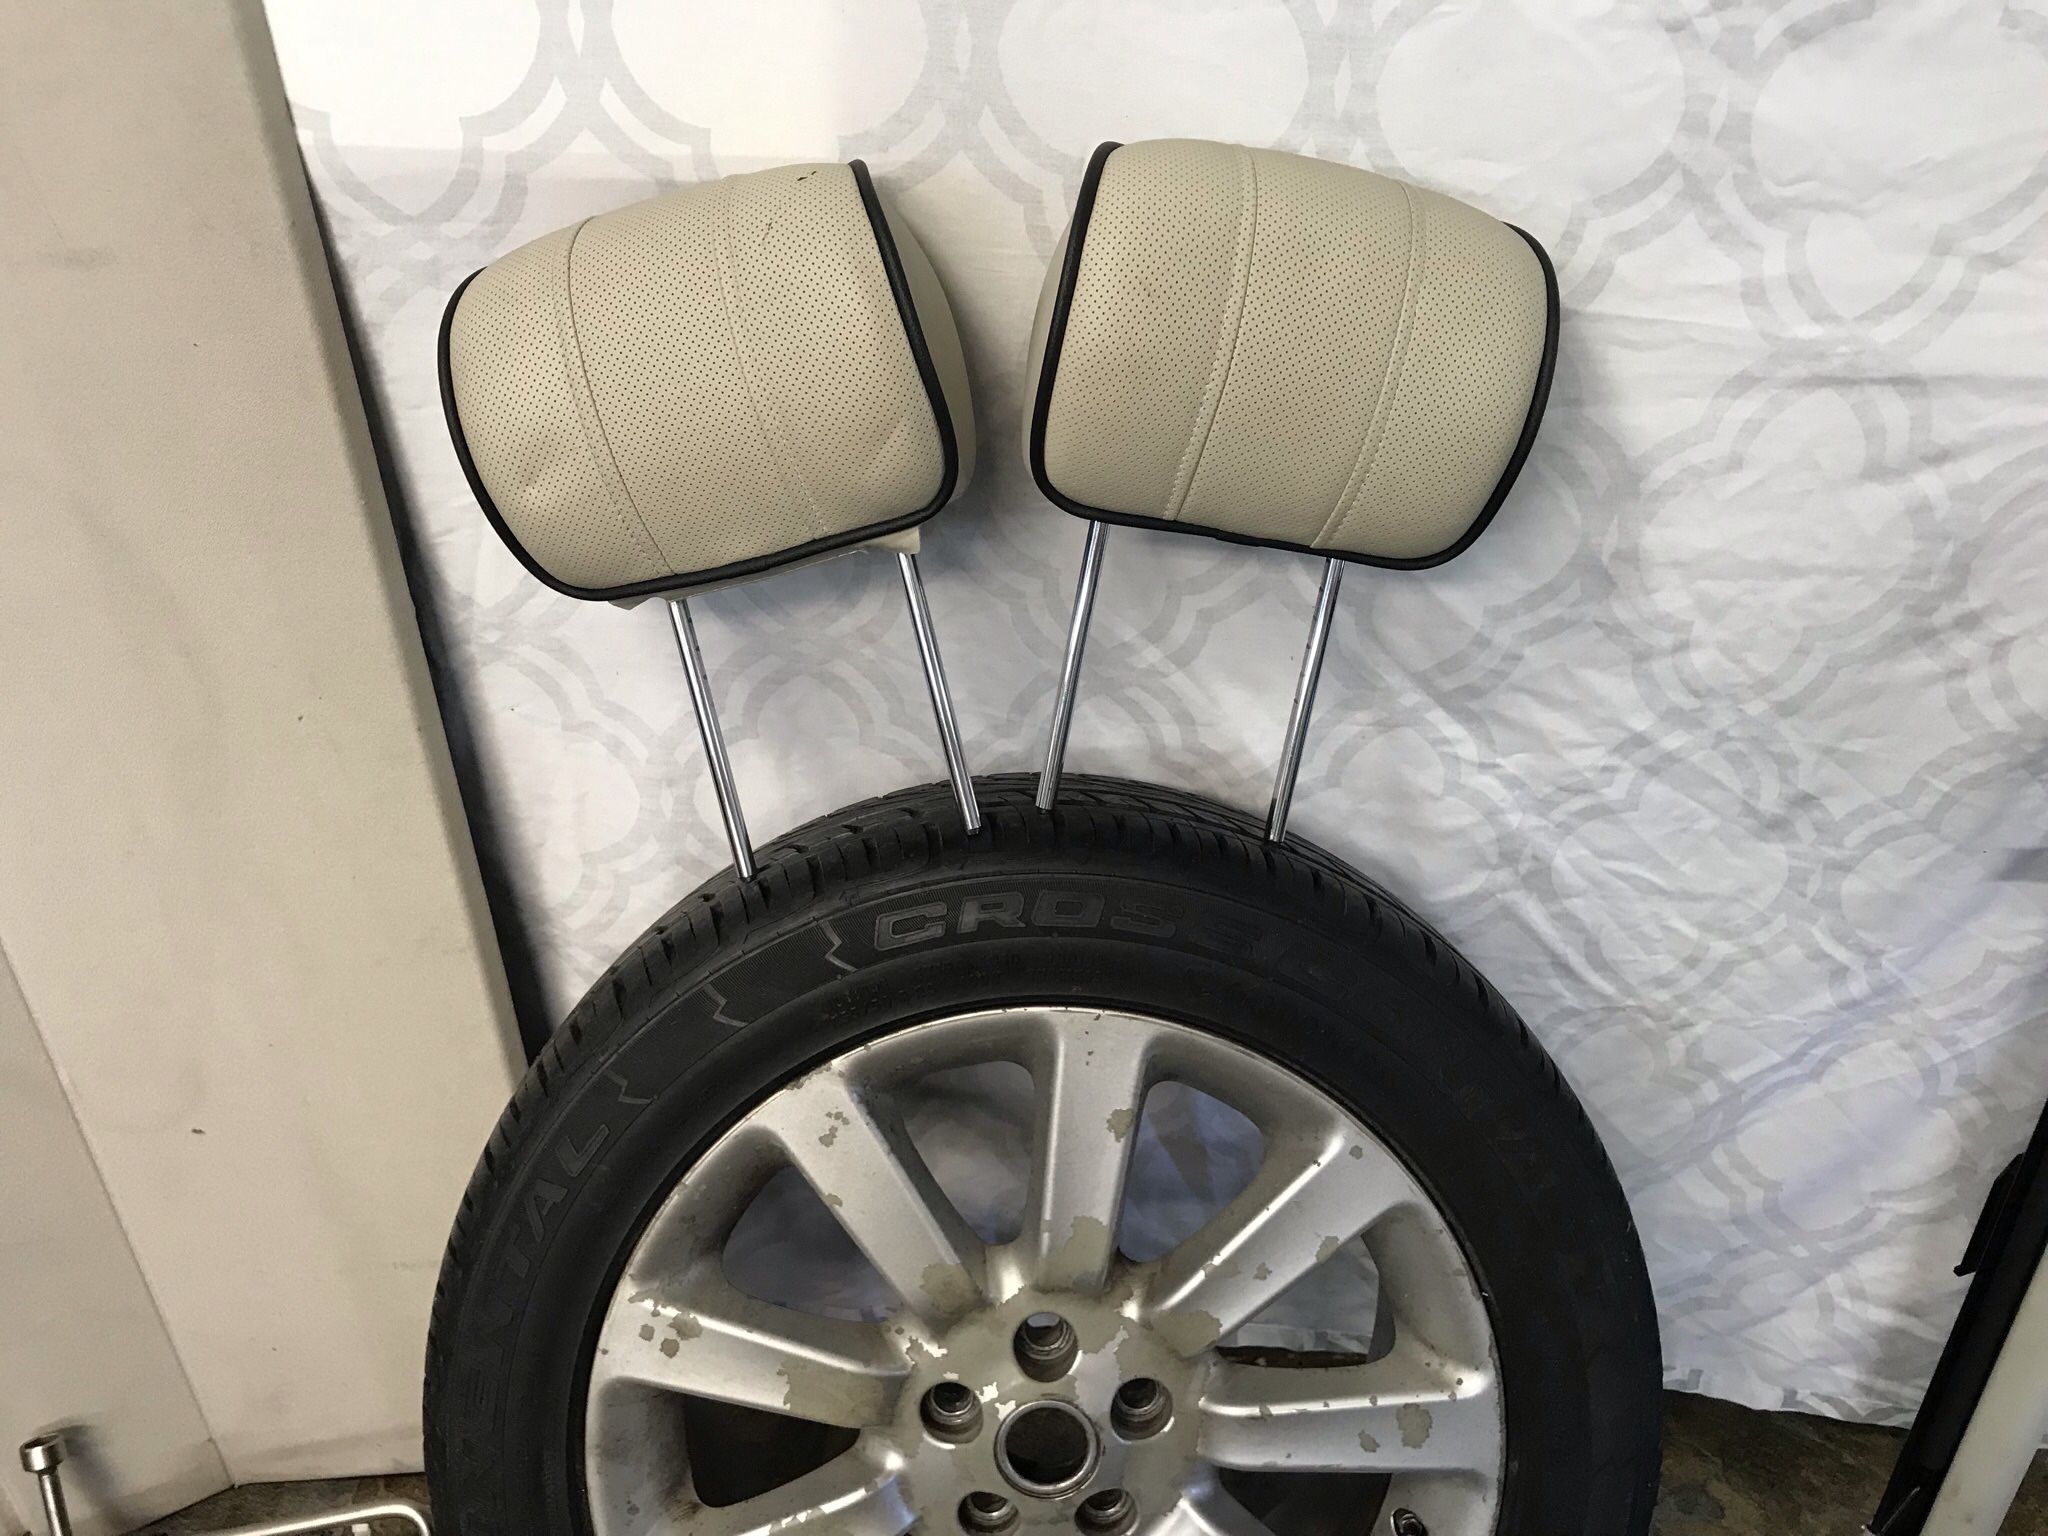 06 range rover rim and tire back headrest mats Jack and back cover